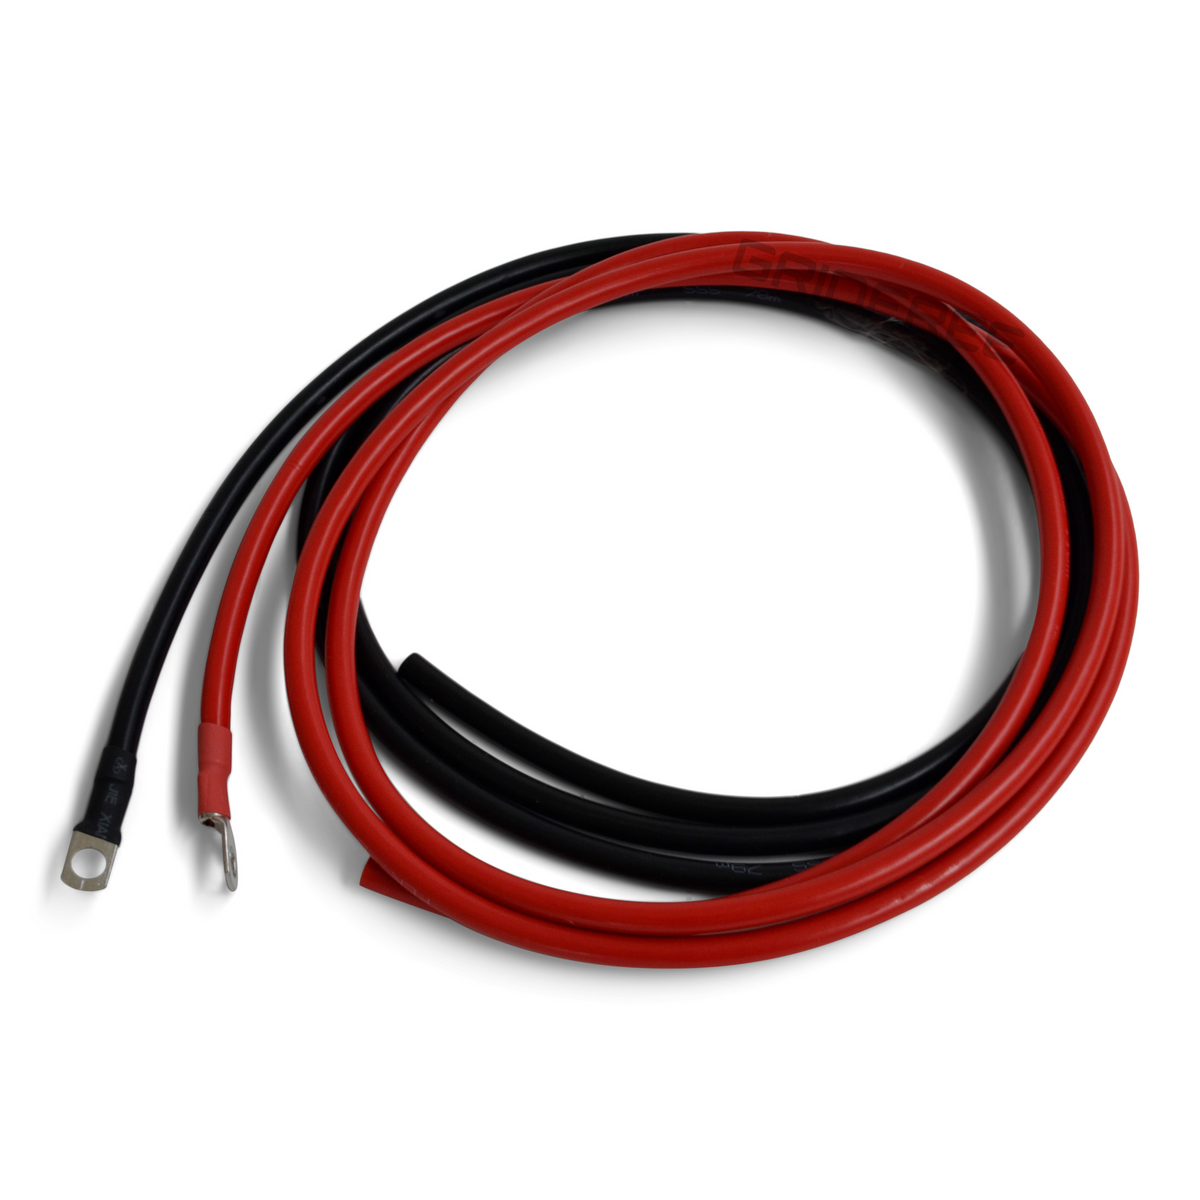 16mm² Pre-Crimped Cable Red&Black - 3m